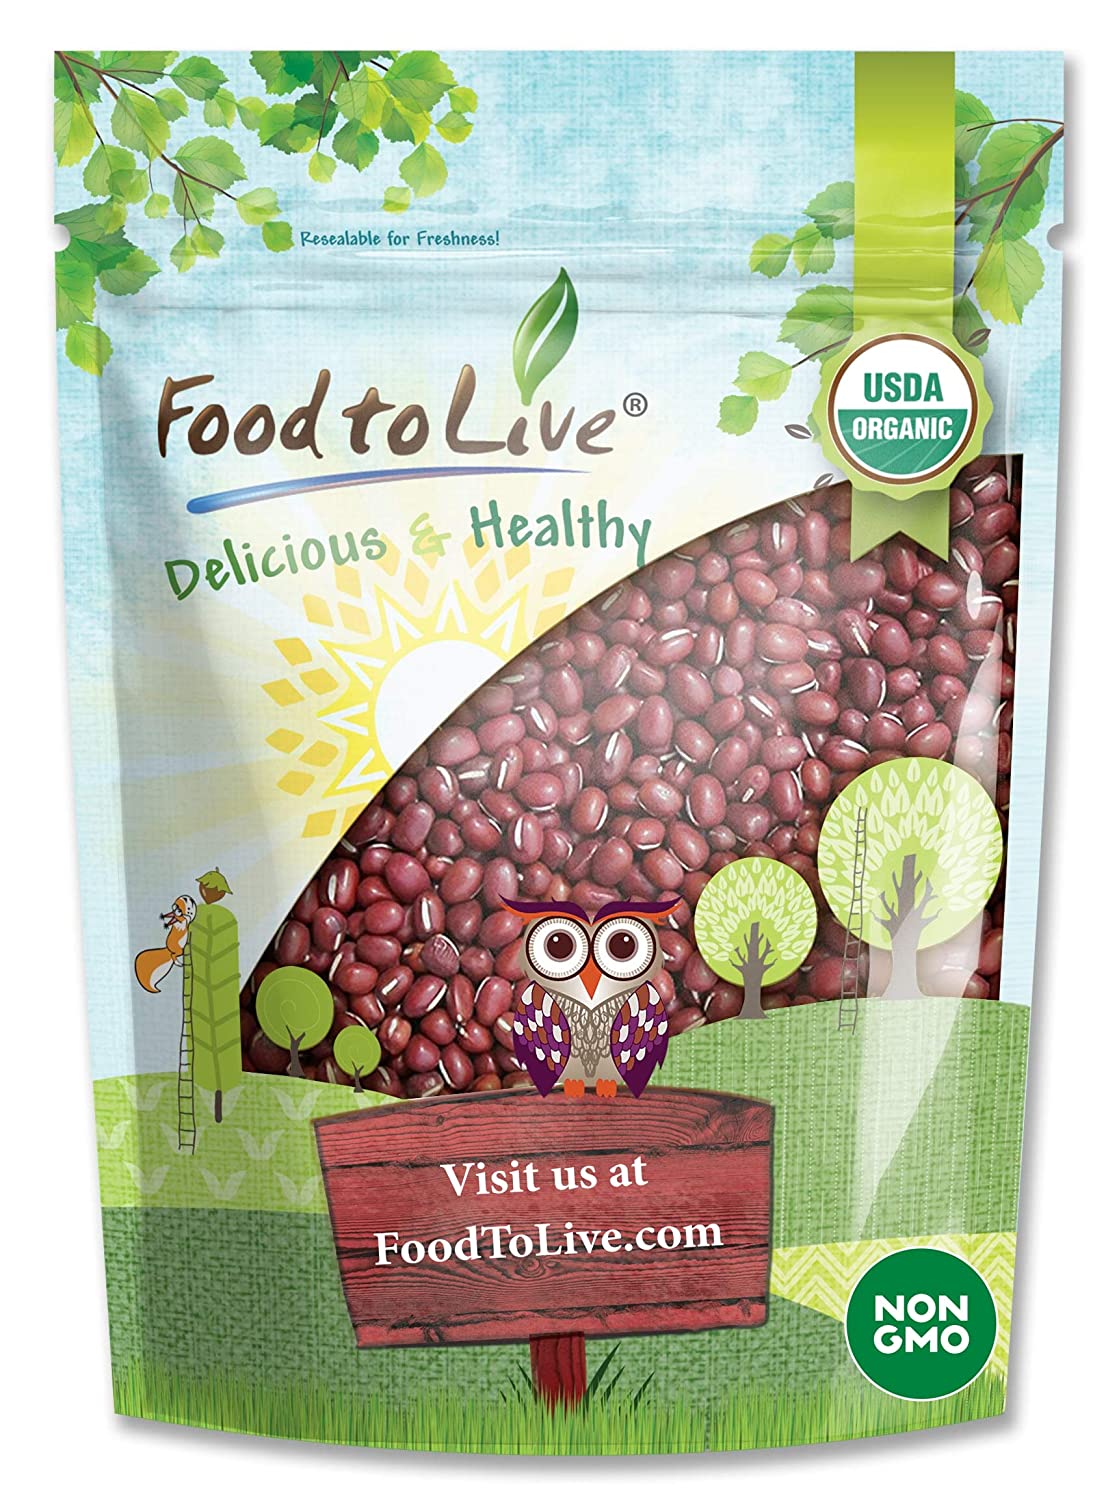 Organic Adzuki Beans — Whole Raw Dried Azuki Beans (Red Mung Beans), Non-GMO, Sproutable, Kosher, Vegan, Bulk. Rich in Minerals, Dietary Fiber and Protein. Perfect for Bean Paste, Soups, and Stews. (2 lbs)